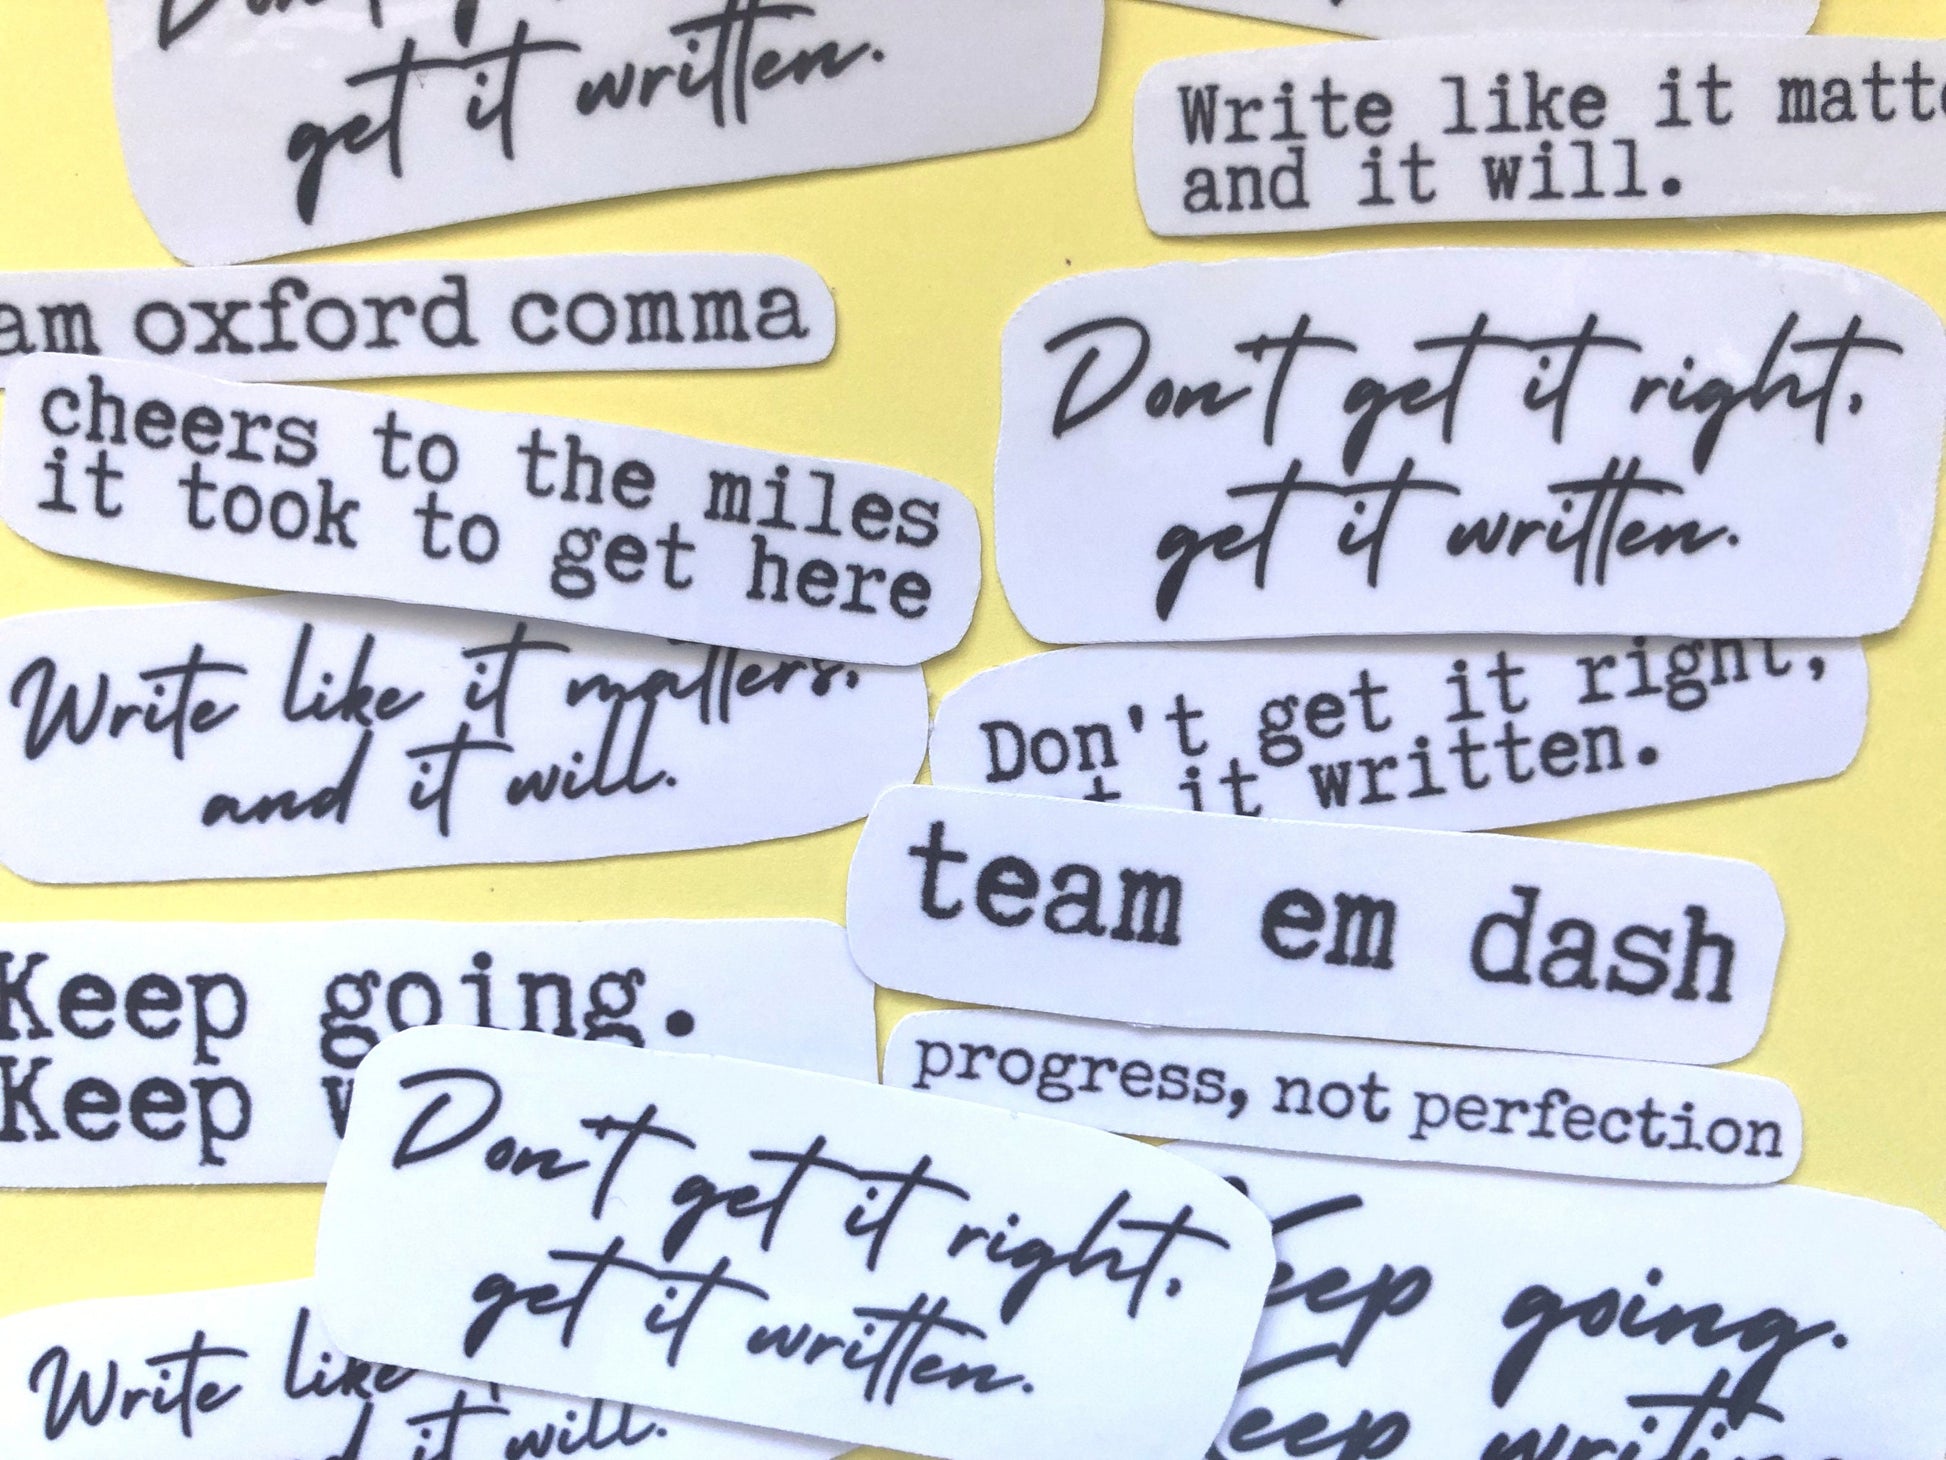 The Non-Fiction Work In Progress Sticker Pack | Writing Stickers